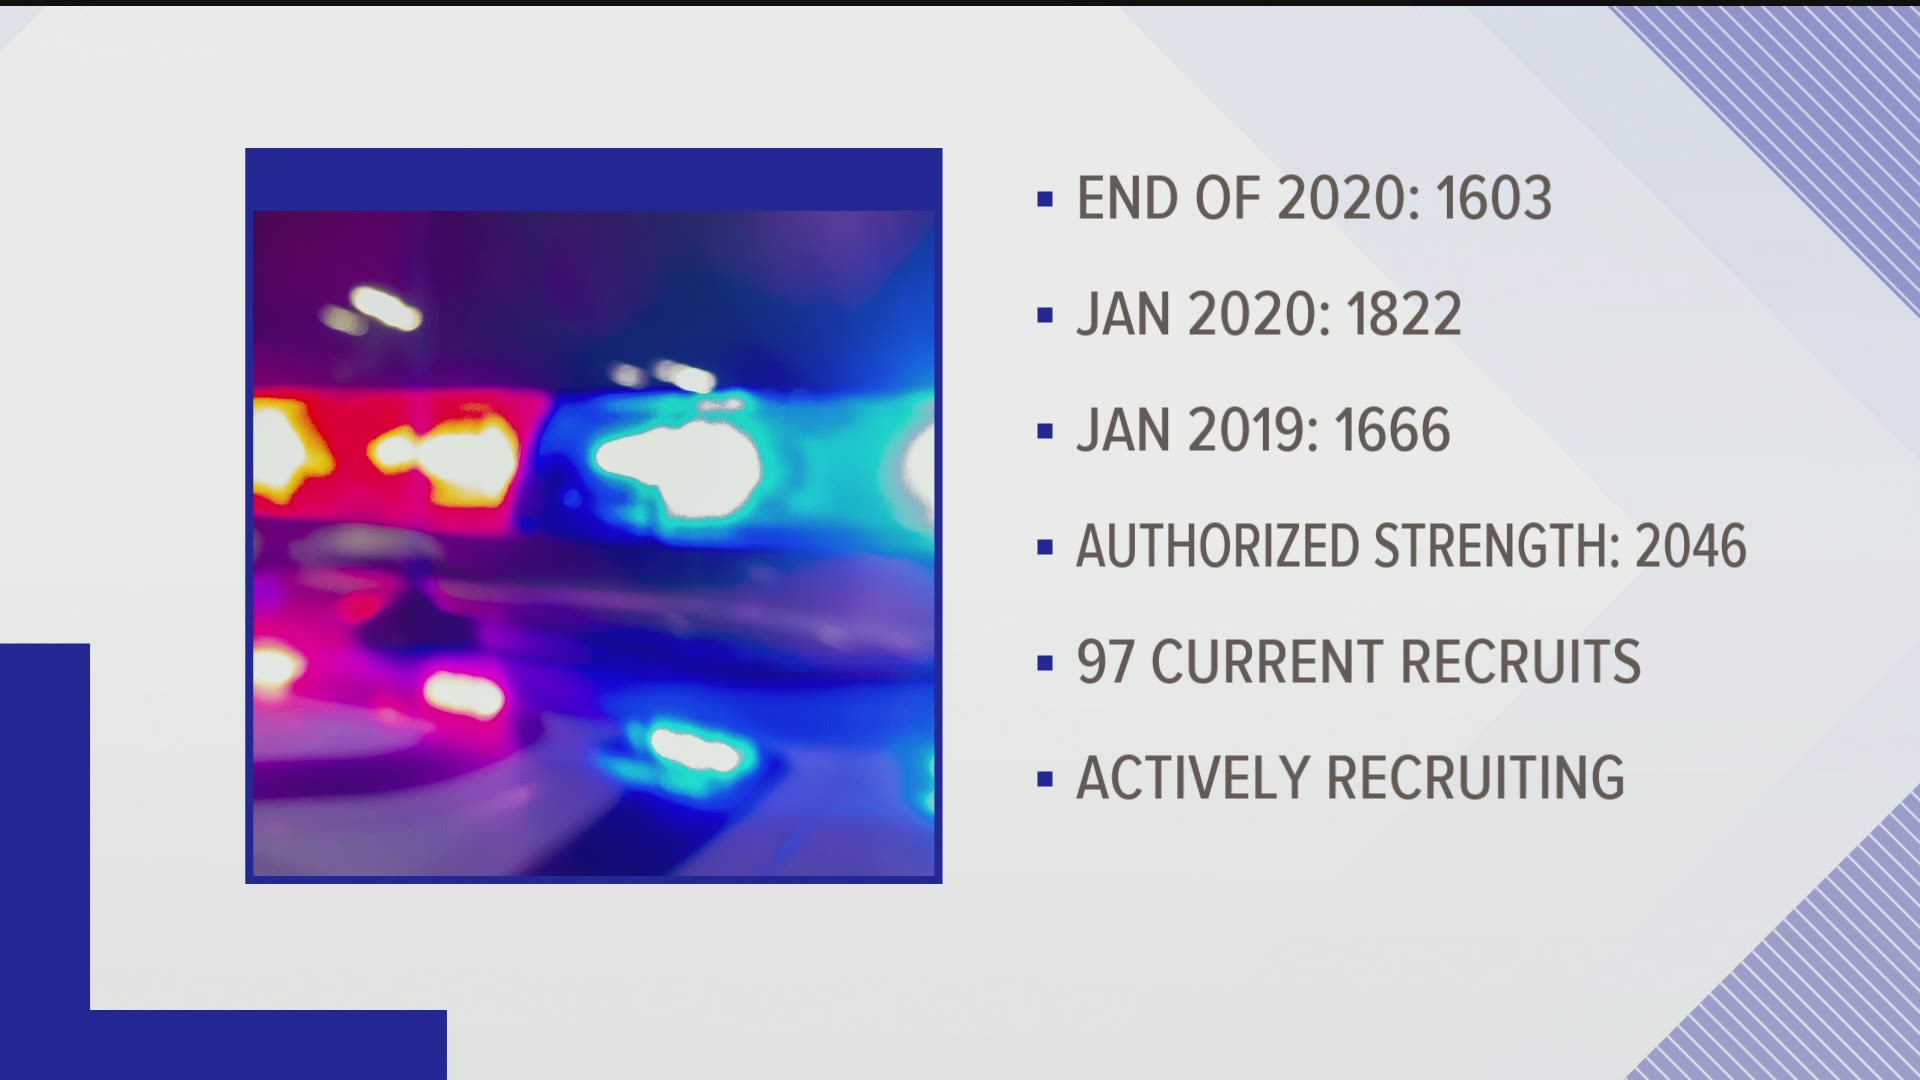 According to the department, it is about 400 short of its 'authorized strength' of 2,046 total officers.